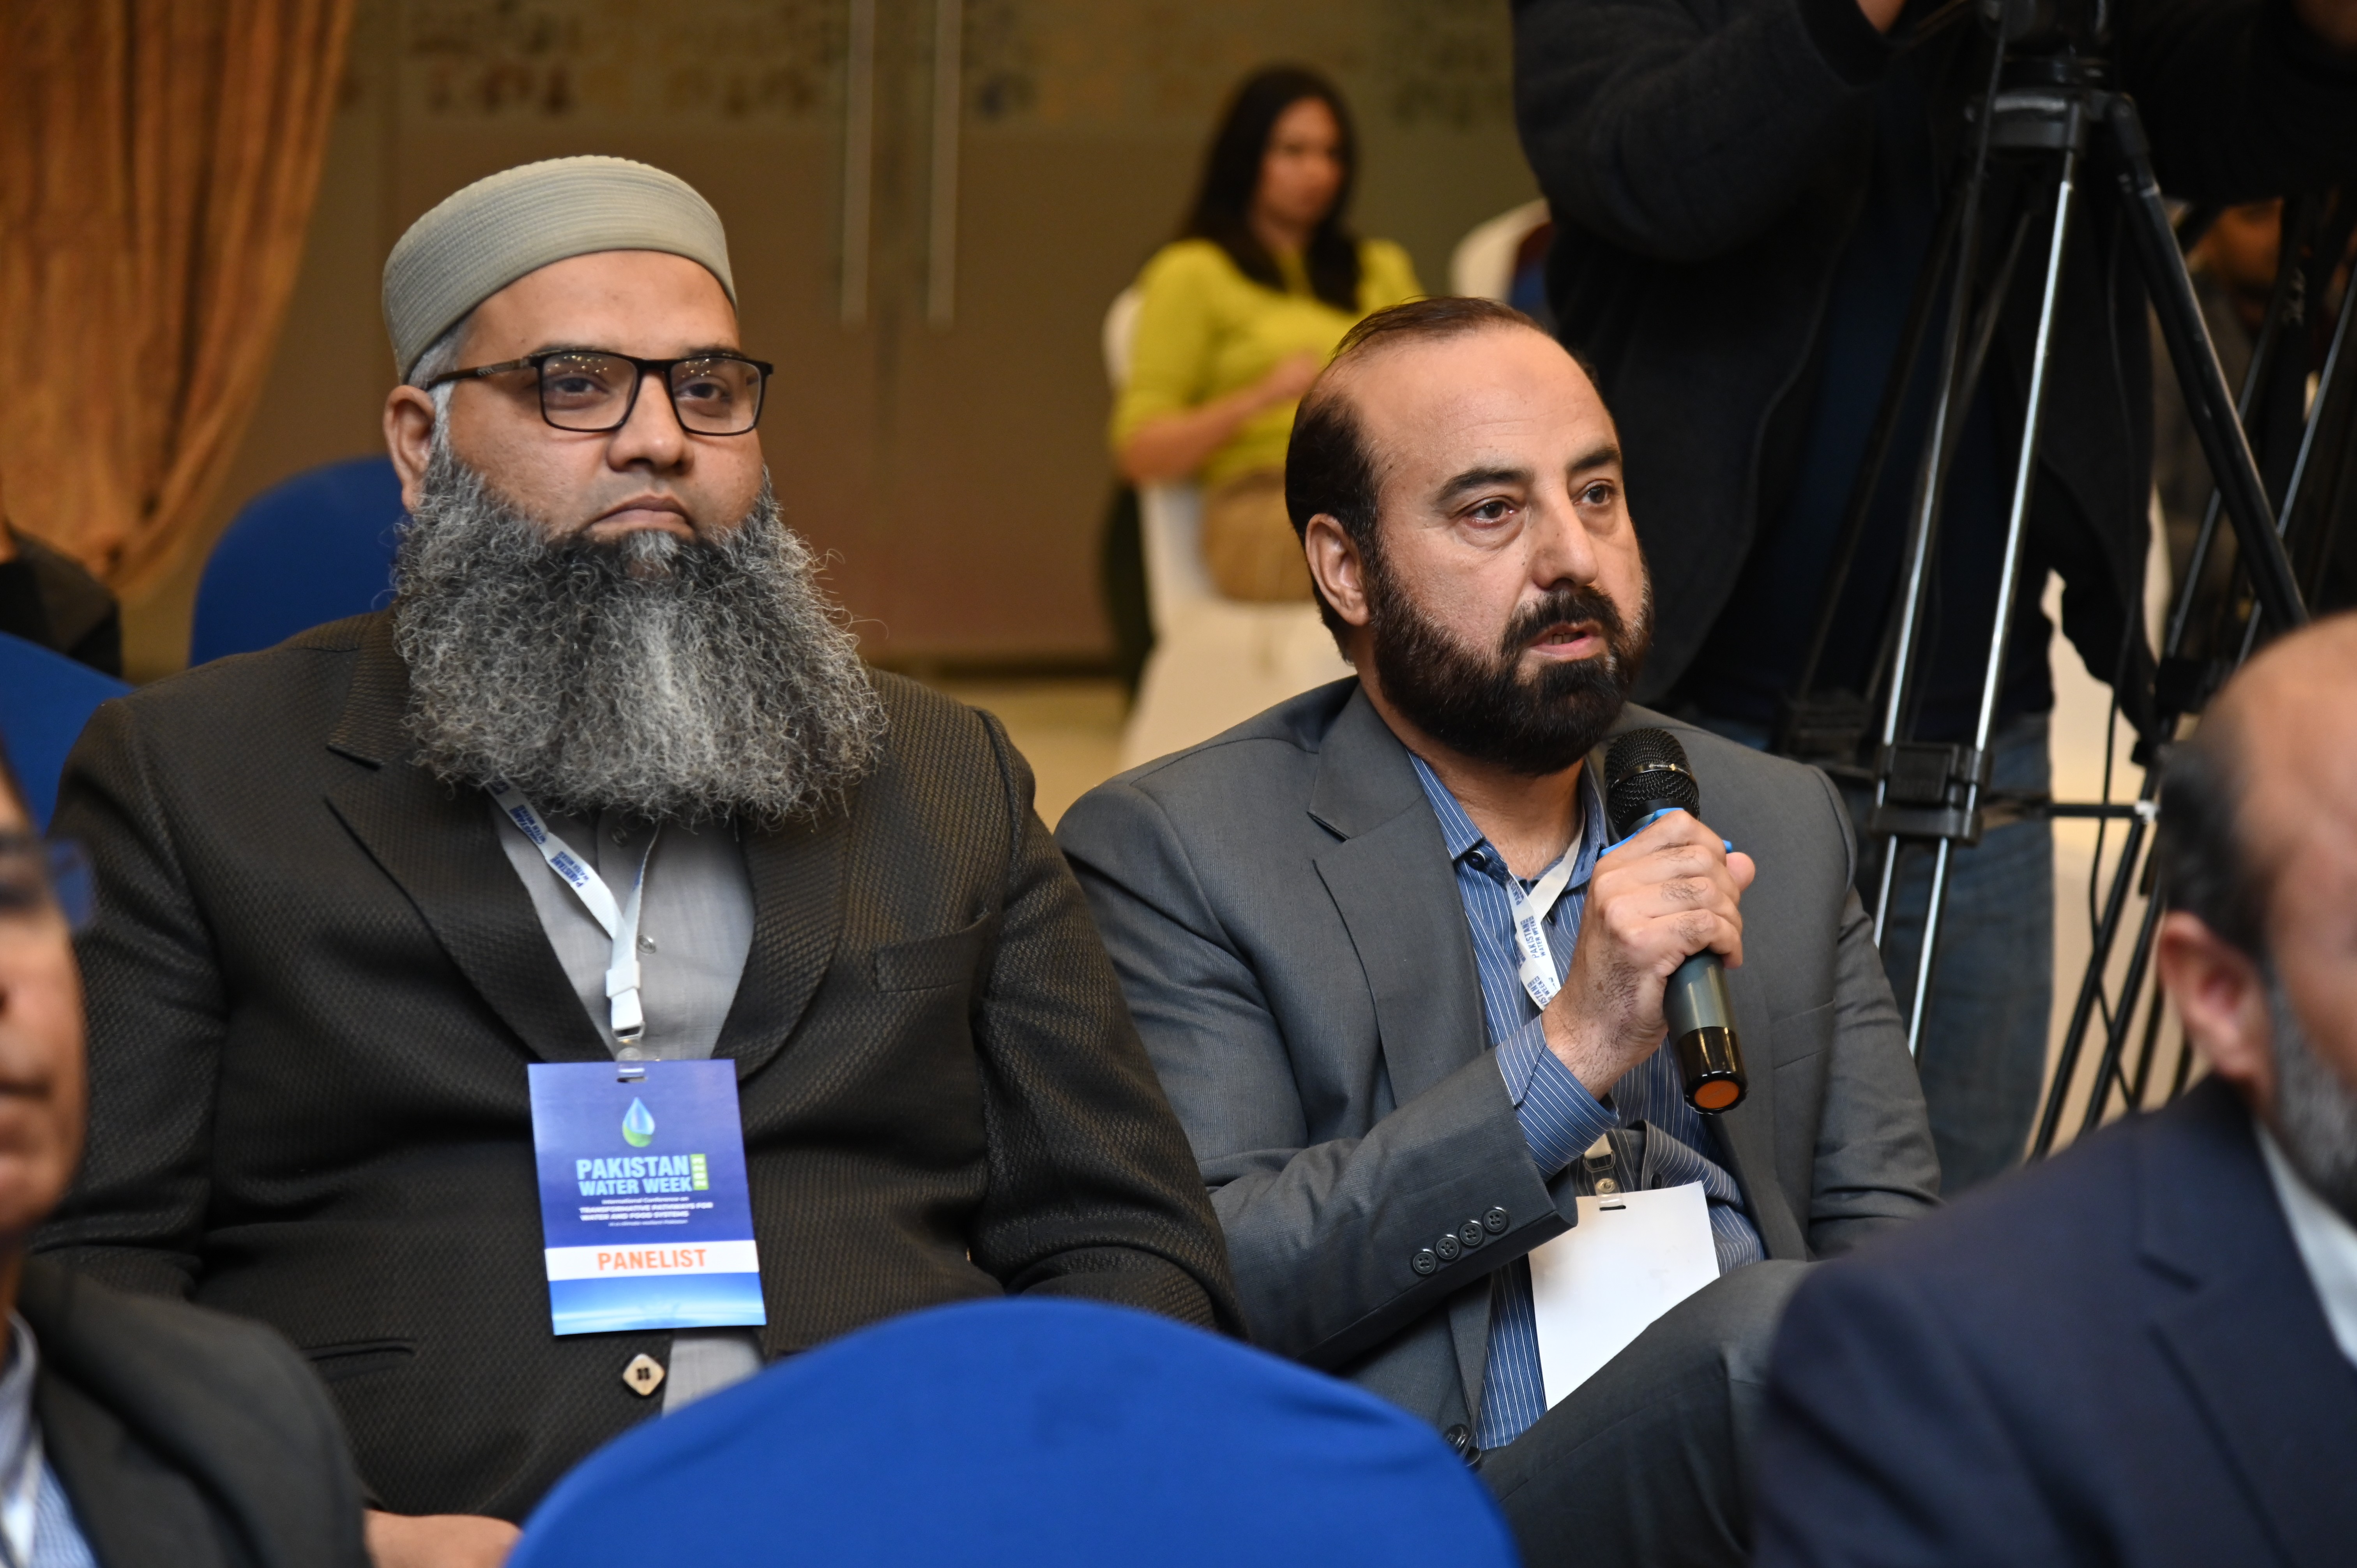 A penal discussion on the international conference on PAKISTAN WATER WEEK 2023:TRANSFORMATIVE PATHWAYS FOR WATER AND FOOD SYSTEM